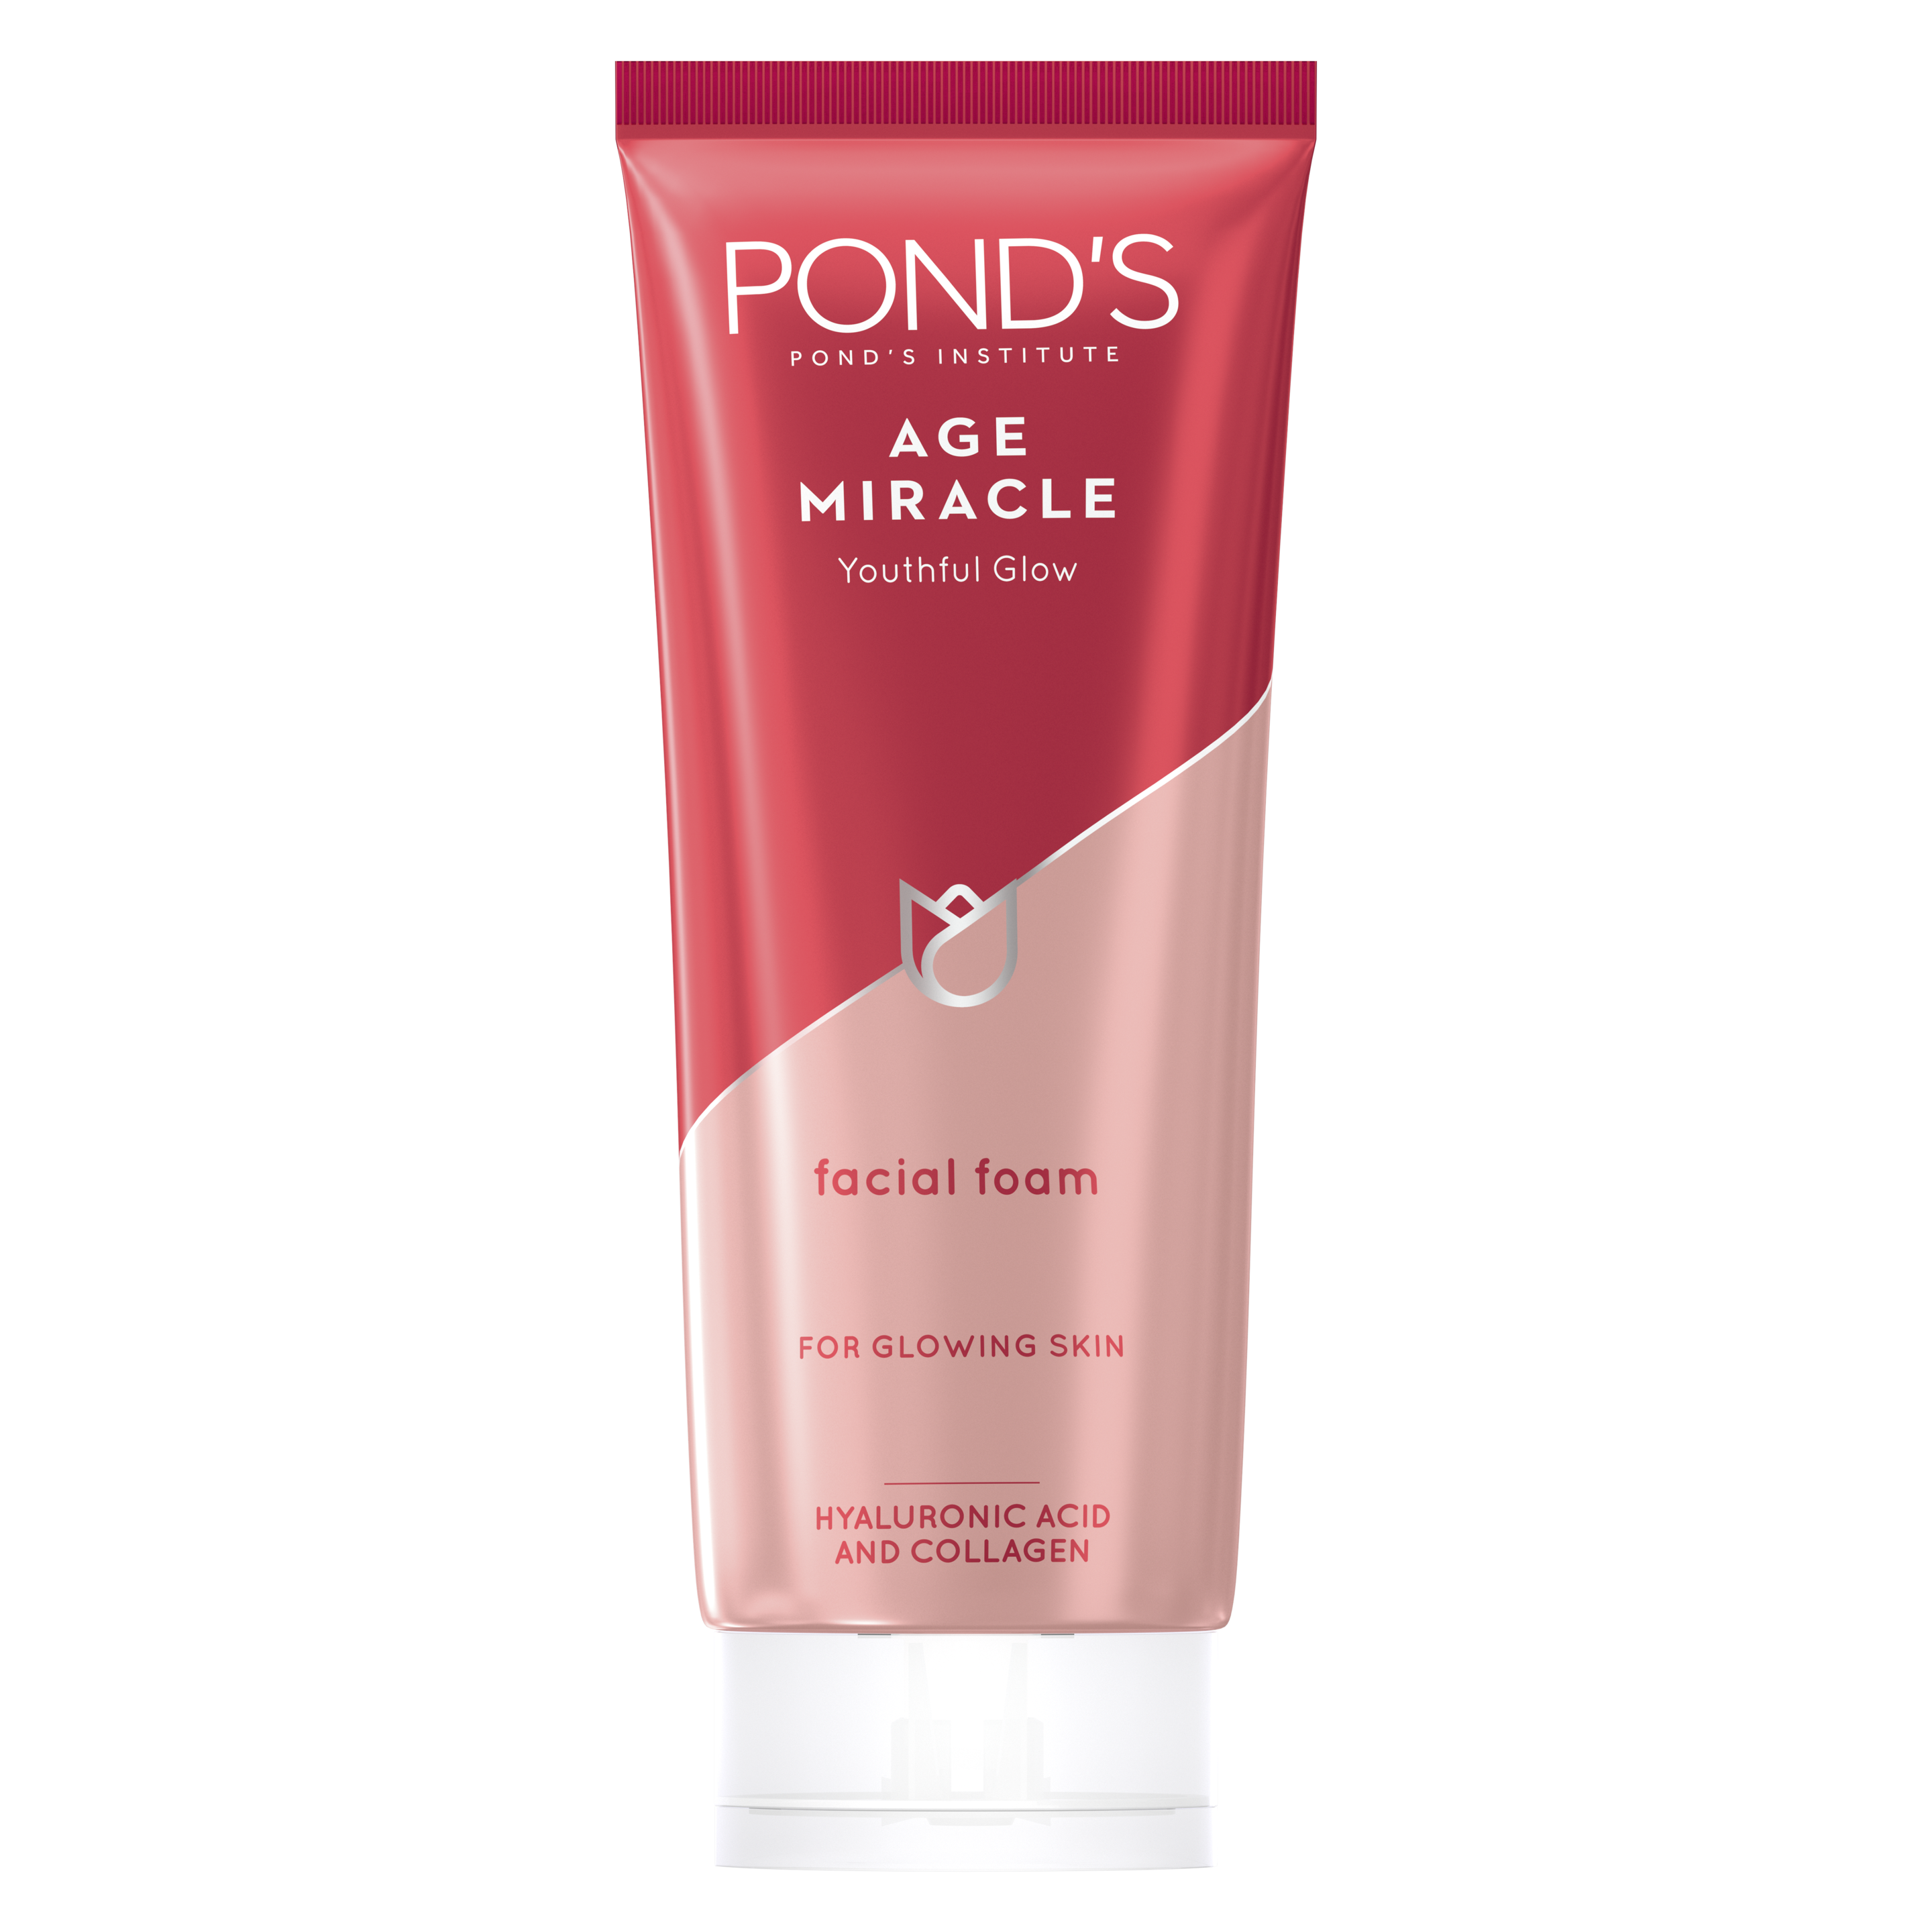 POND'S Age Miracle Cell ReGEN Foaming Face Wash